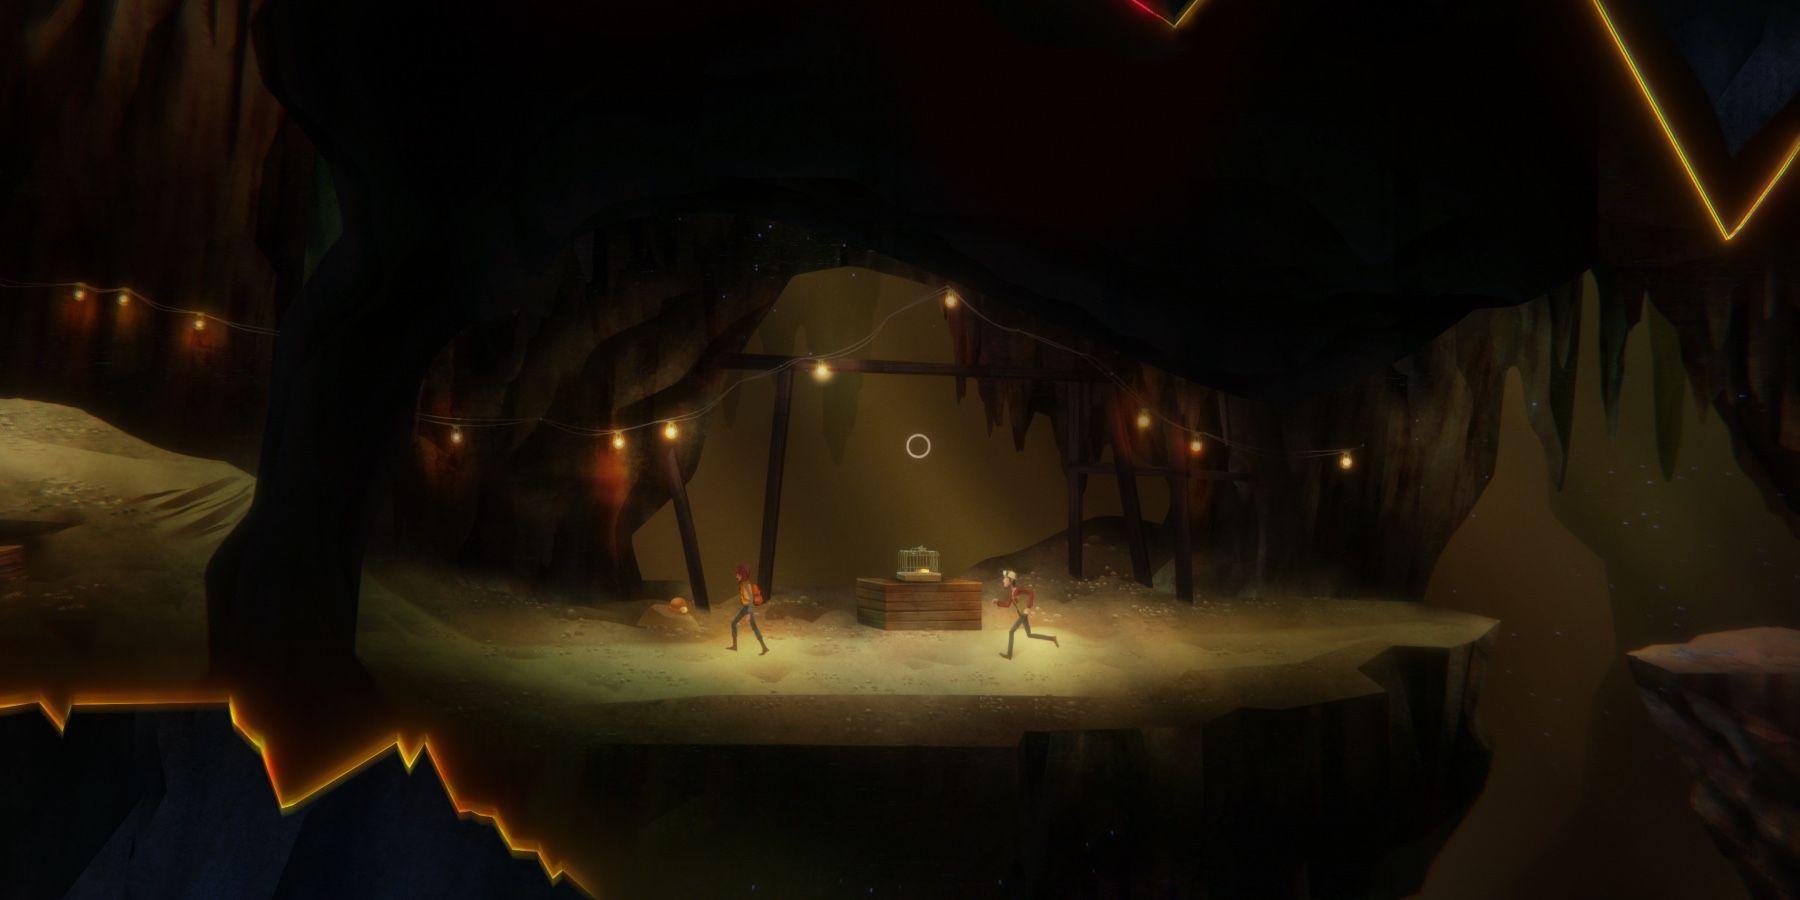 OXENFREE 2 gameplay of players running through dimly lit cavern